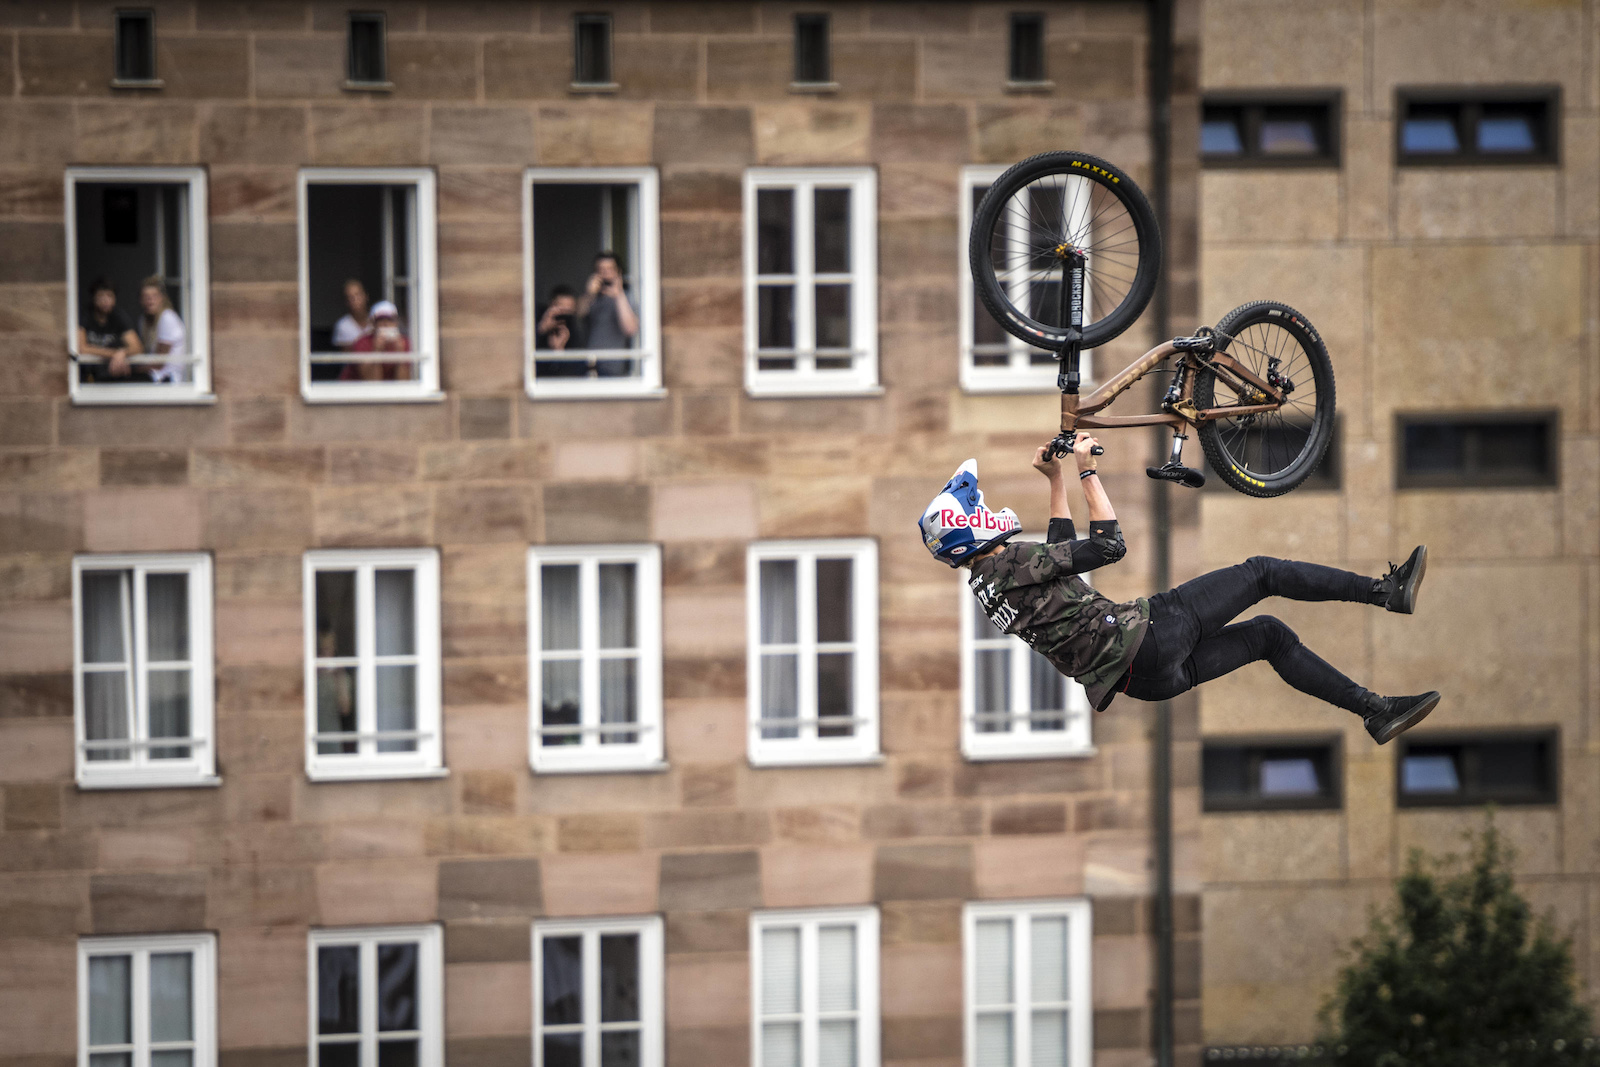 Emil Johansson of the Sweden performs during the finals of the Red Bull District Ride 2017 in Nuremberg, Germany on September 2nd, 2017 // Sebastian Marko/Red Bull Content Pool // AP-1T3XUXZ9W2111 // Usage for editorial use only //